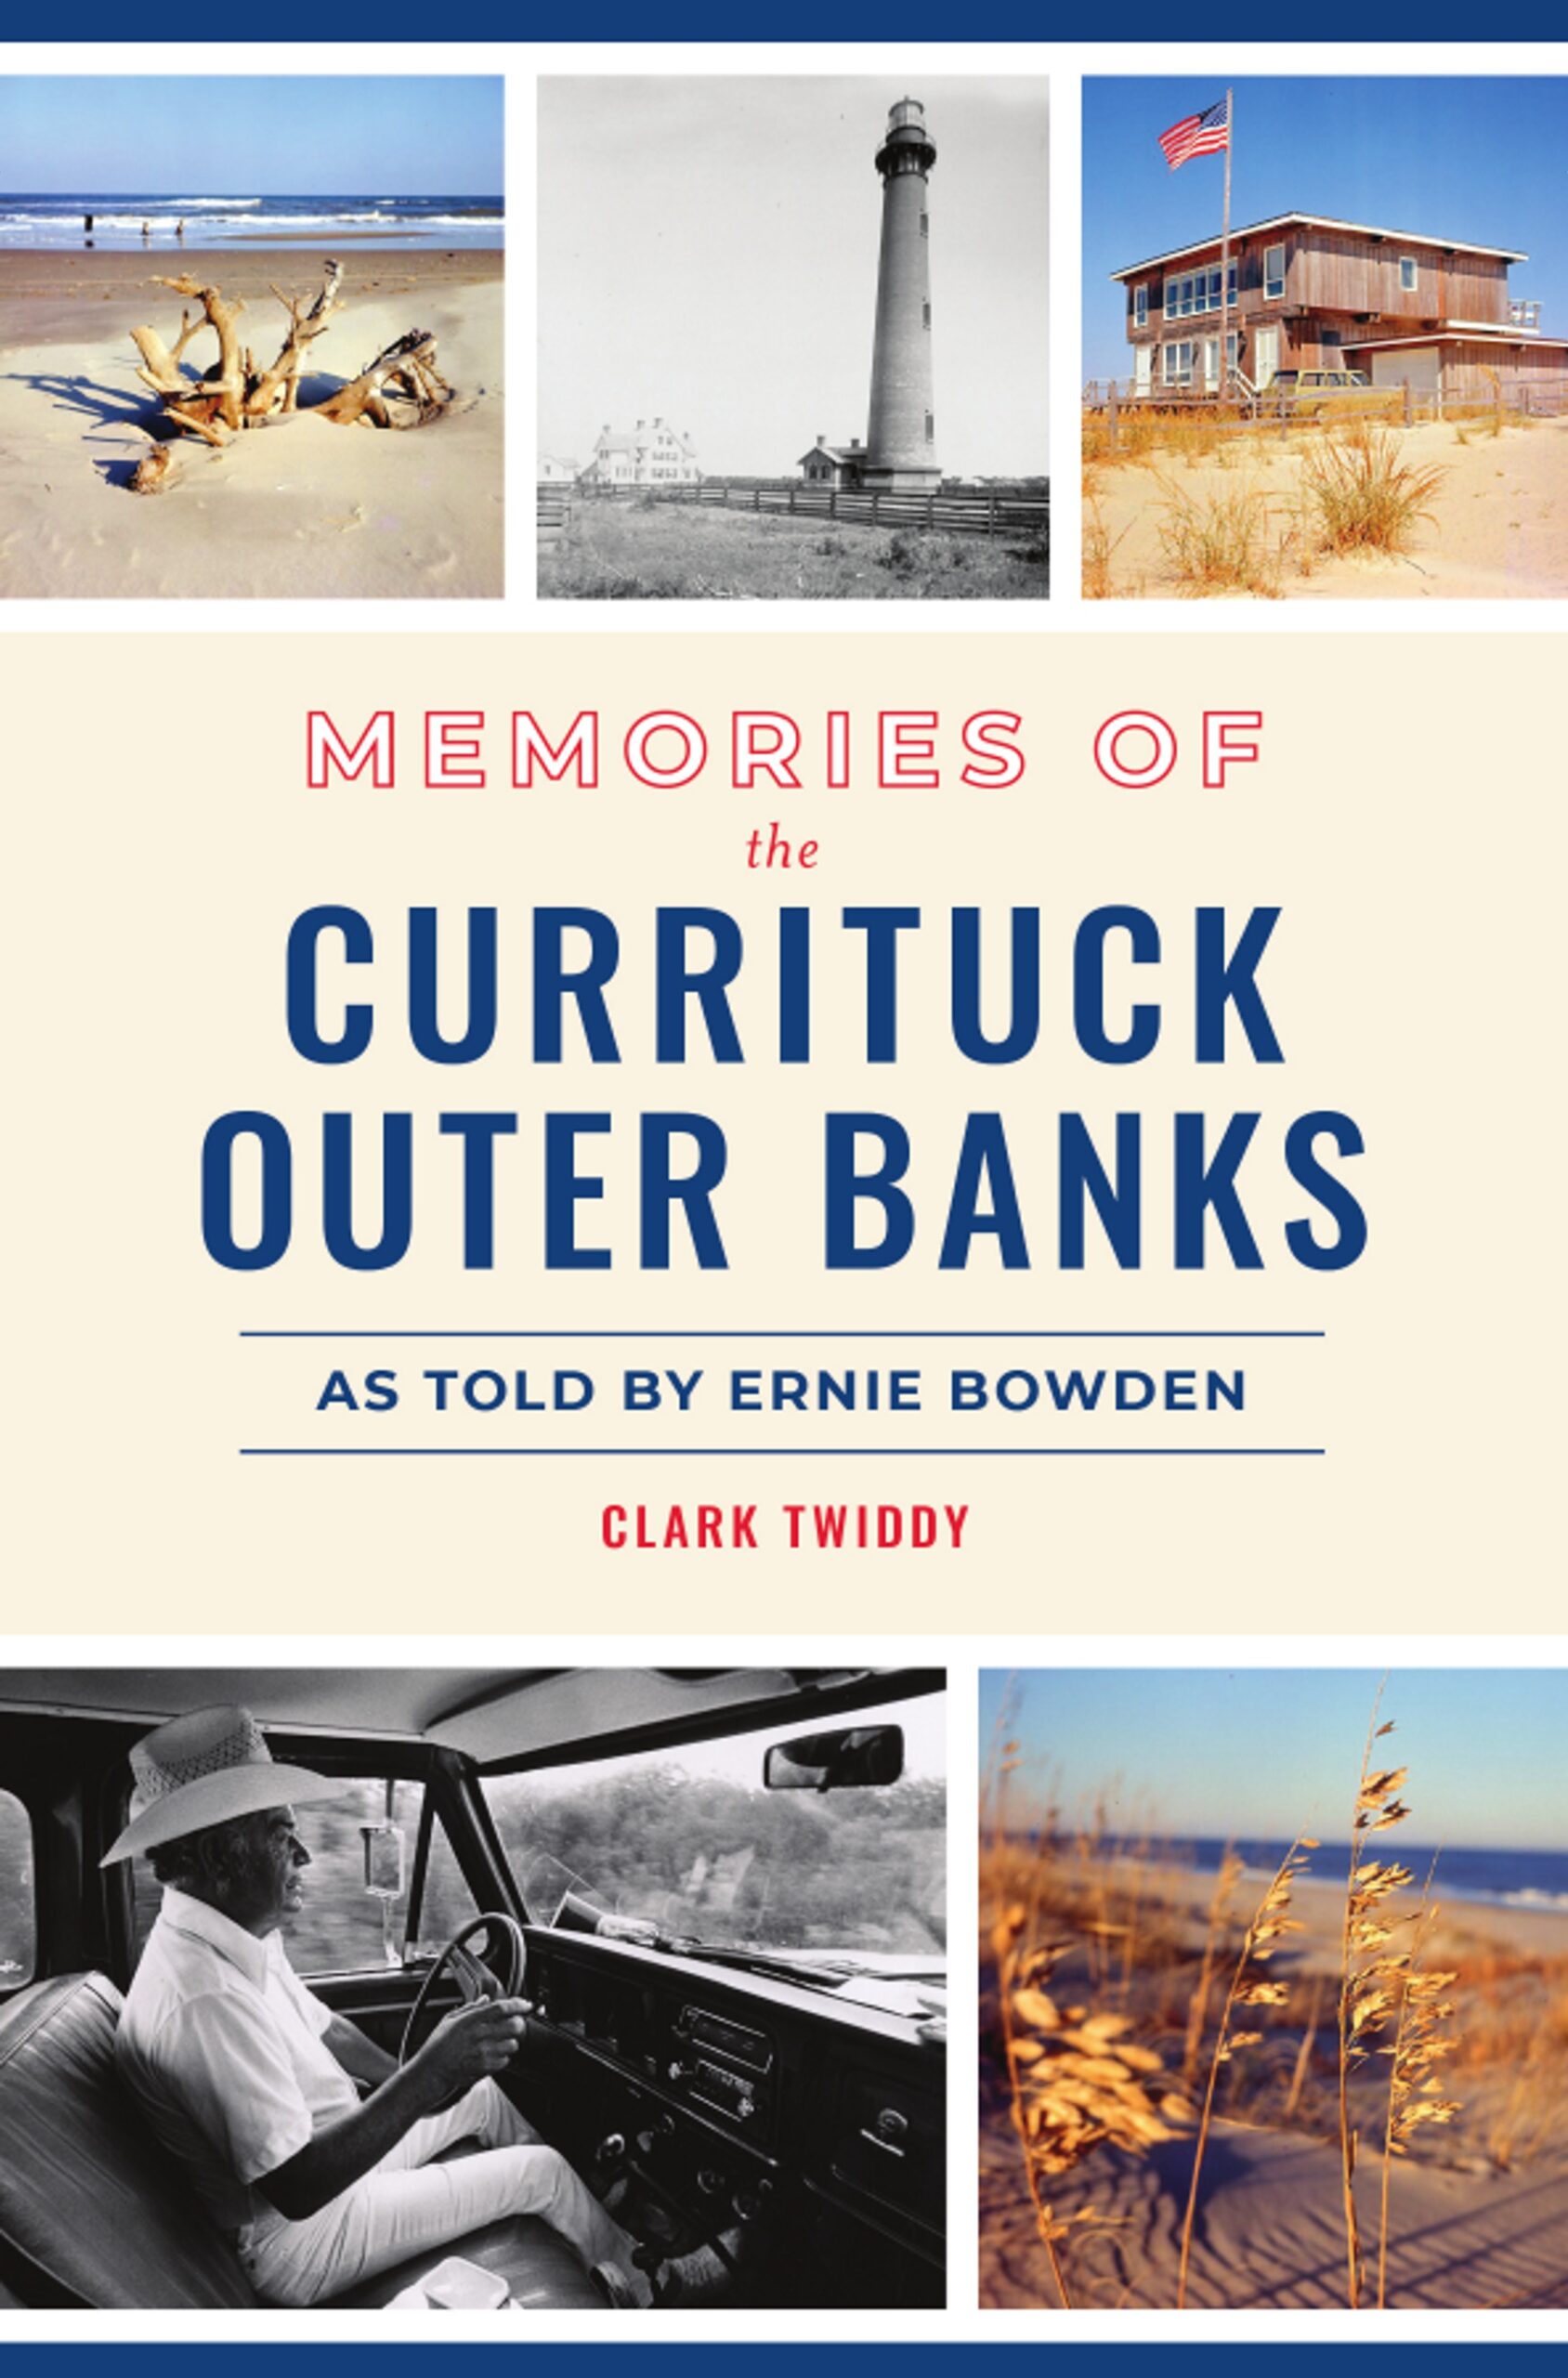 Memories of the Currituck Outer Banks: As Told by Ernie Bowden